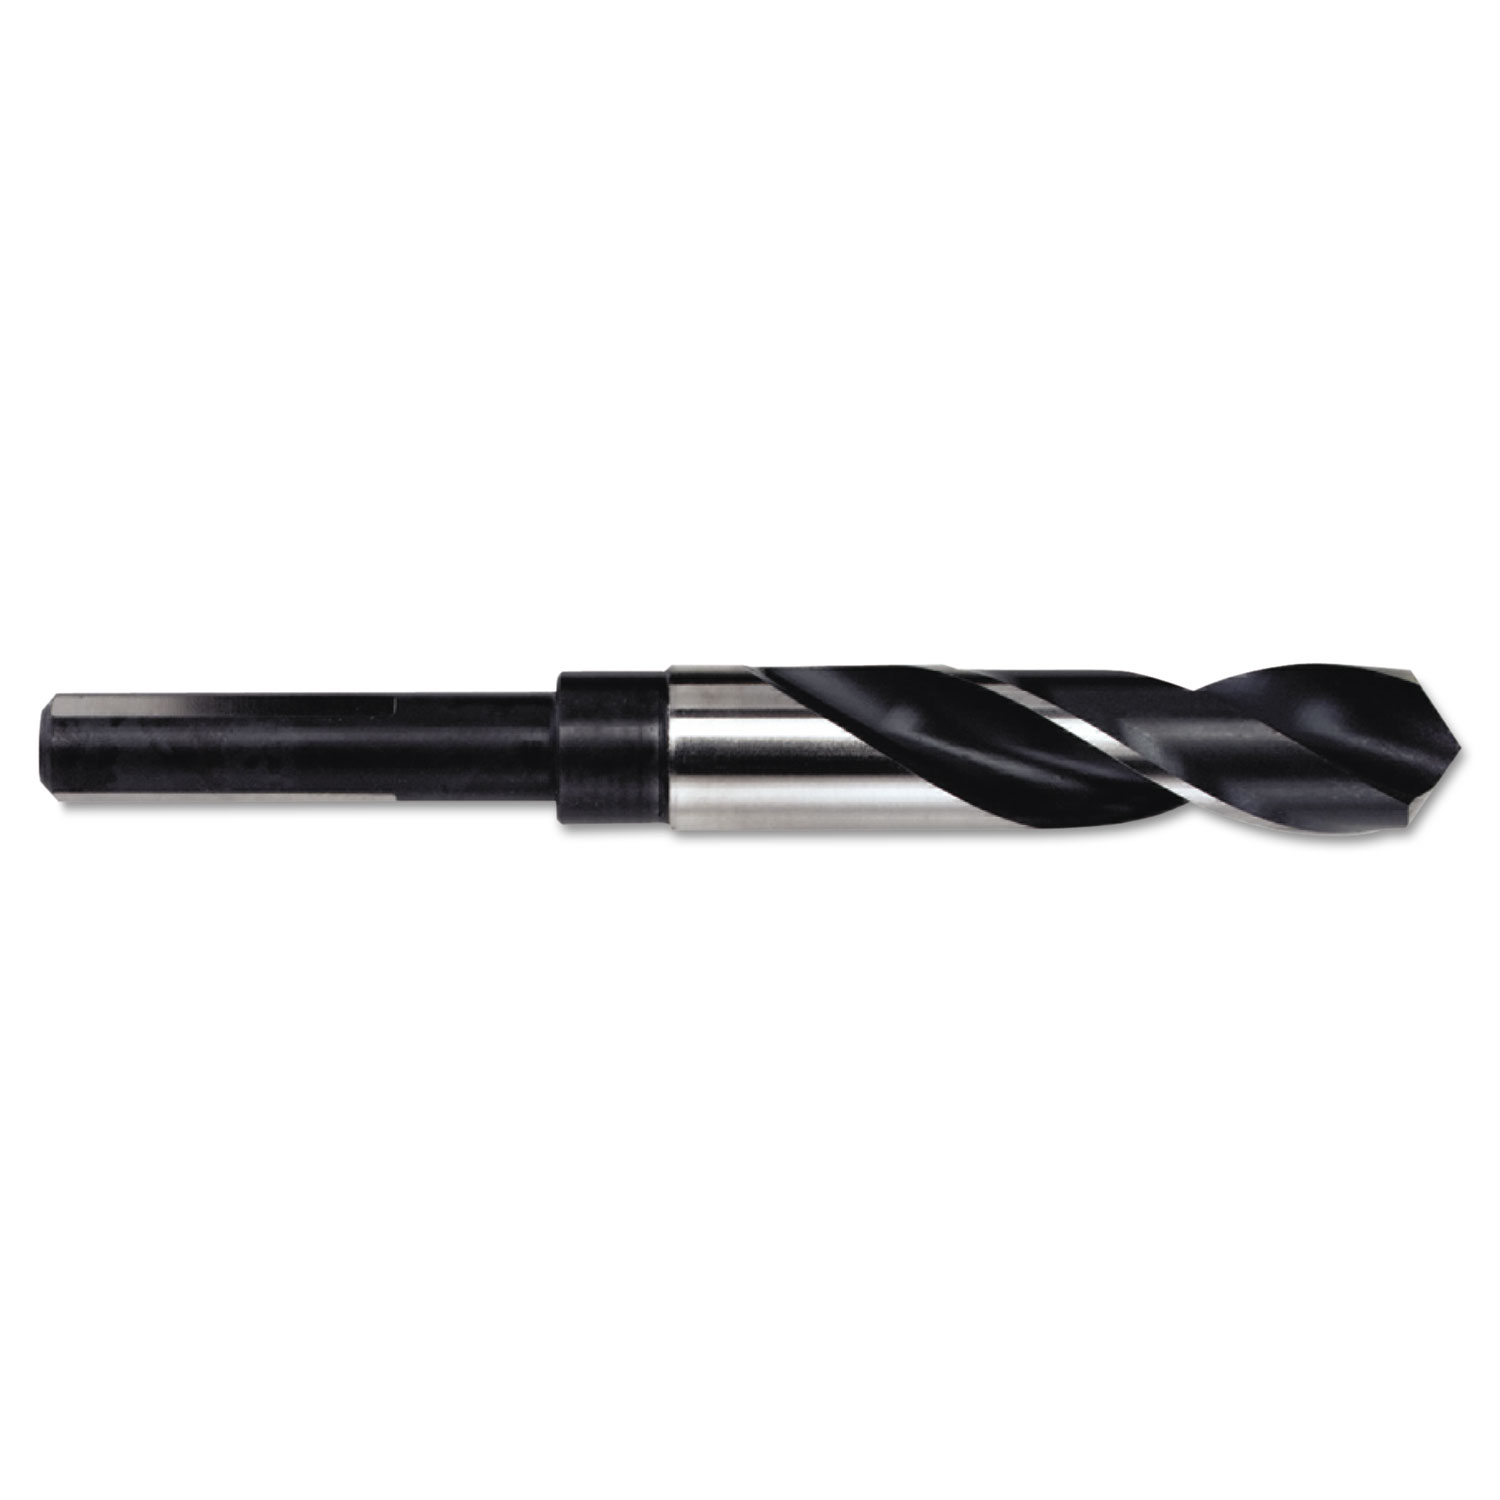  IRWIN 91136 1/2 Reduced Shank Silver and Deming HSS Drill Bit, 9/16 (IRW91136) 